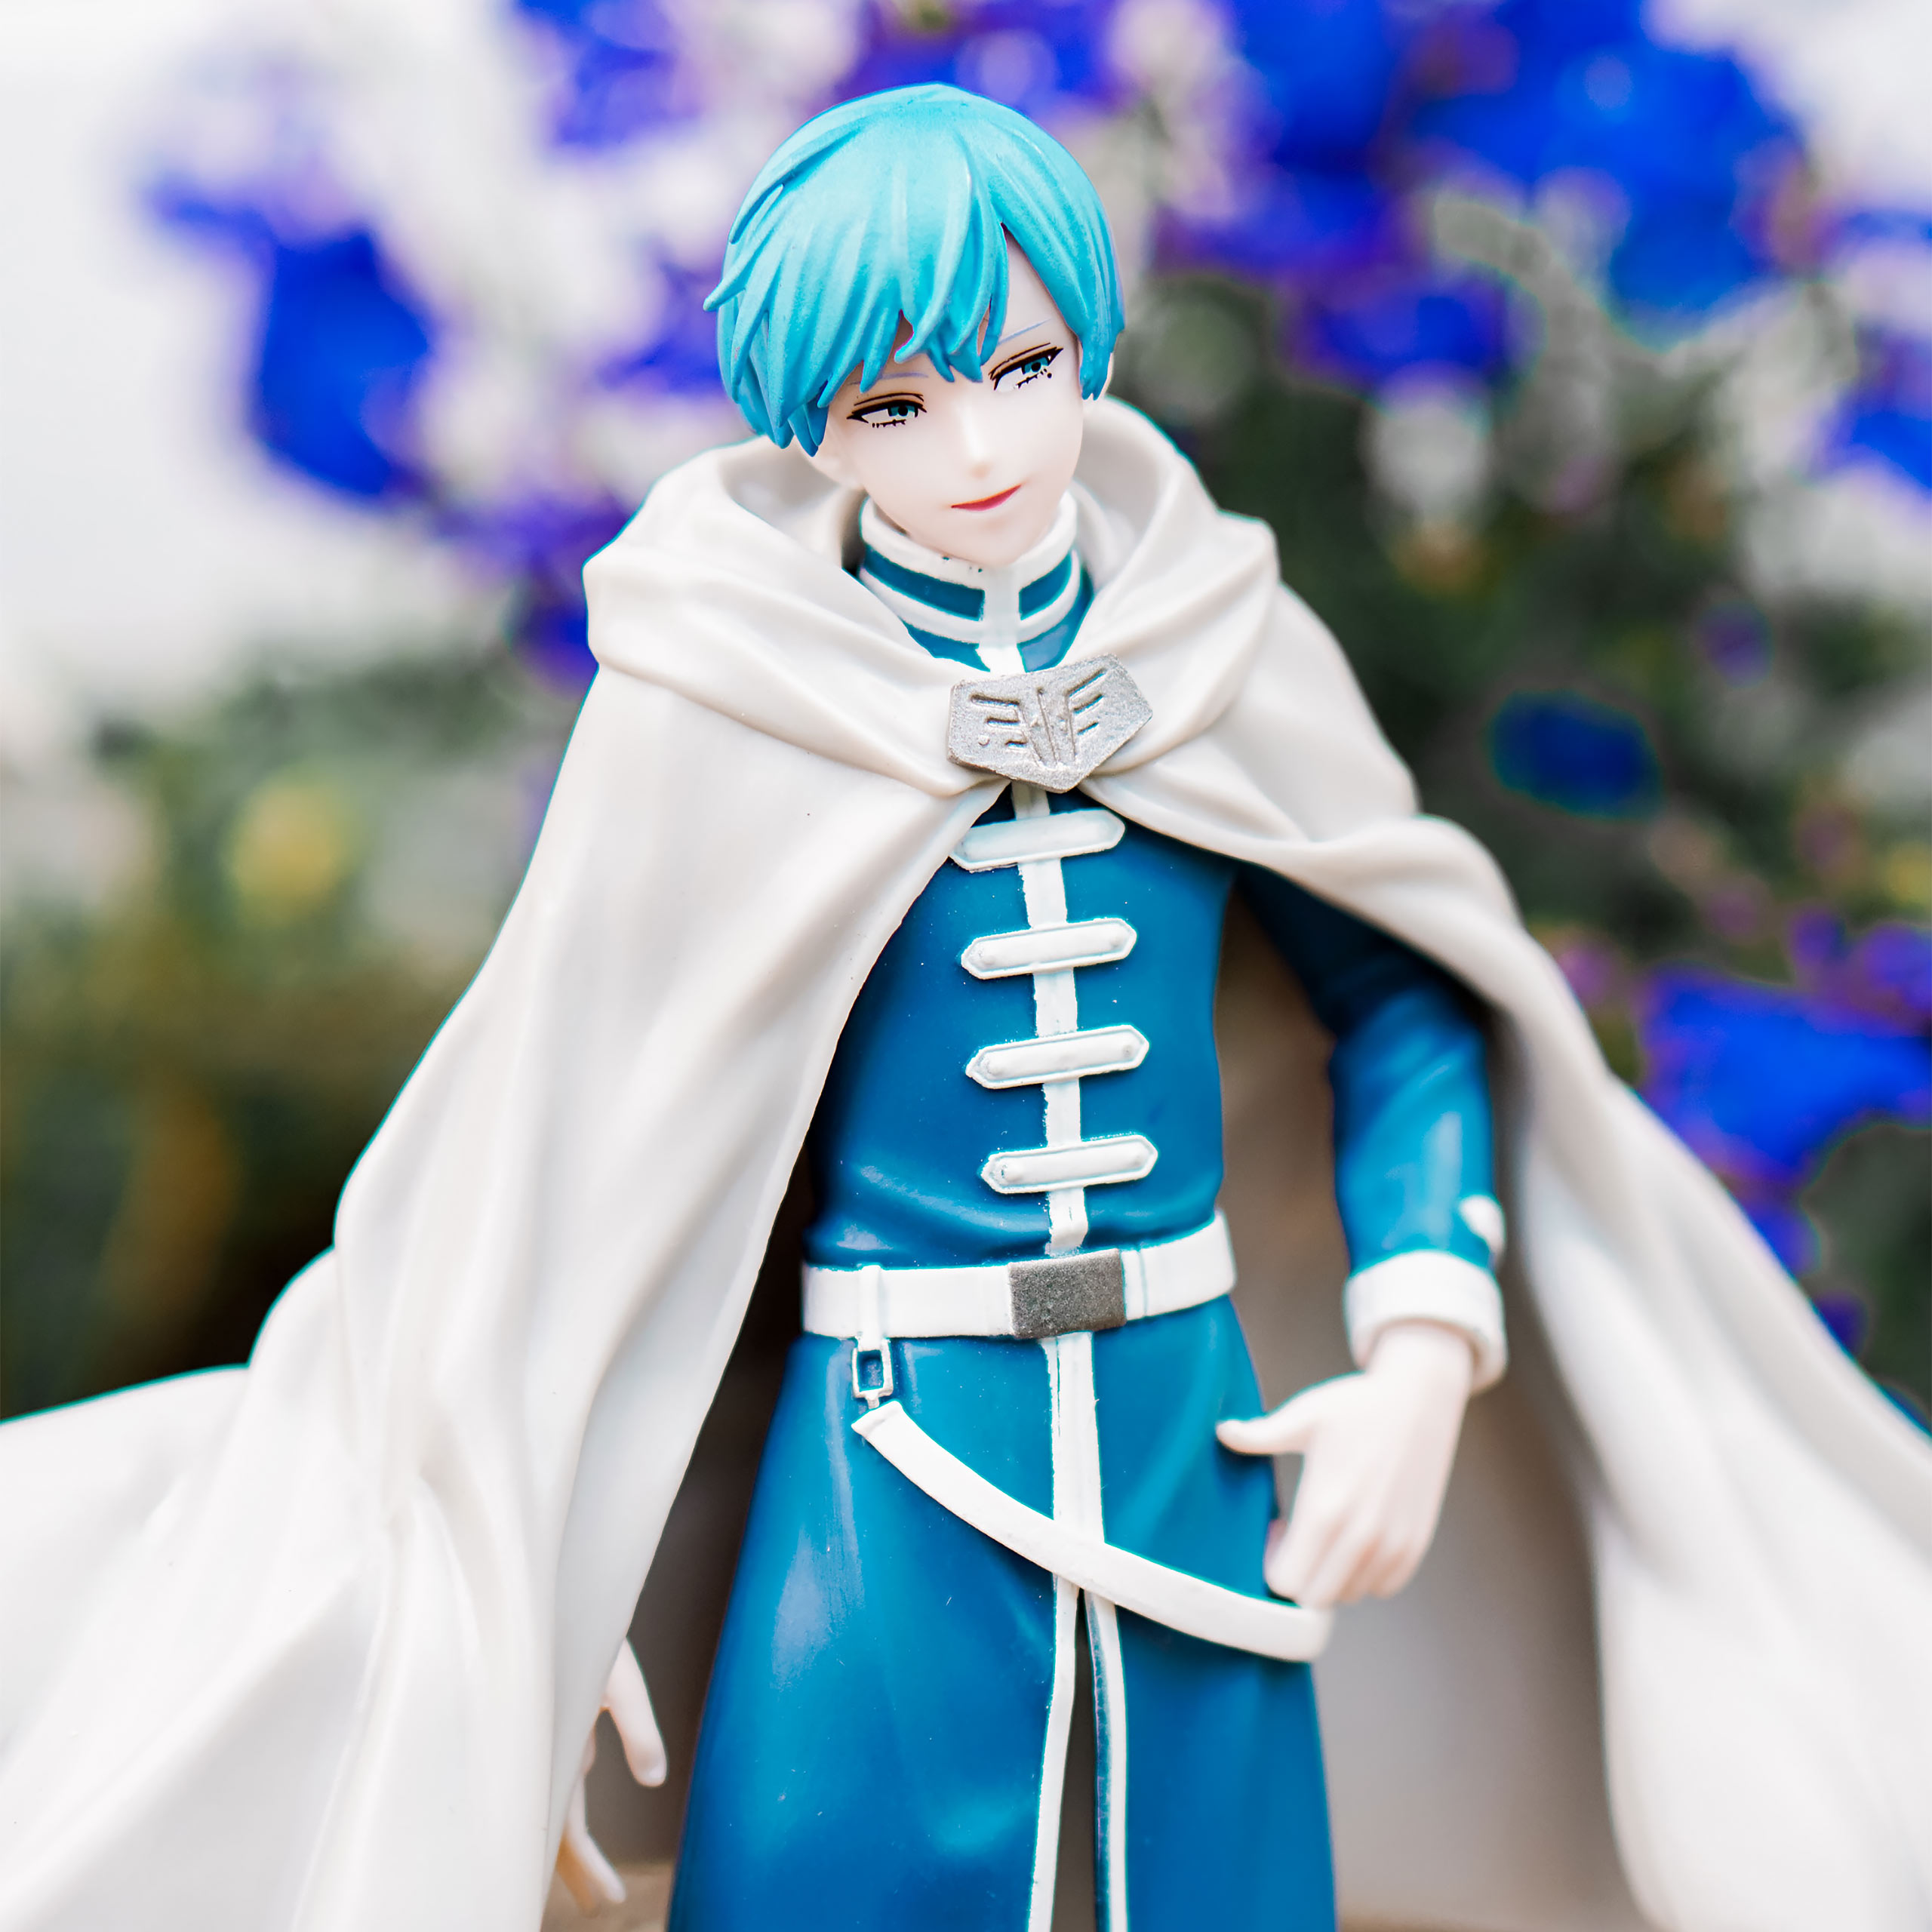 Freezing: After the End of the Journey - Sky Desktop x Decorate Collections Figure